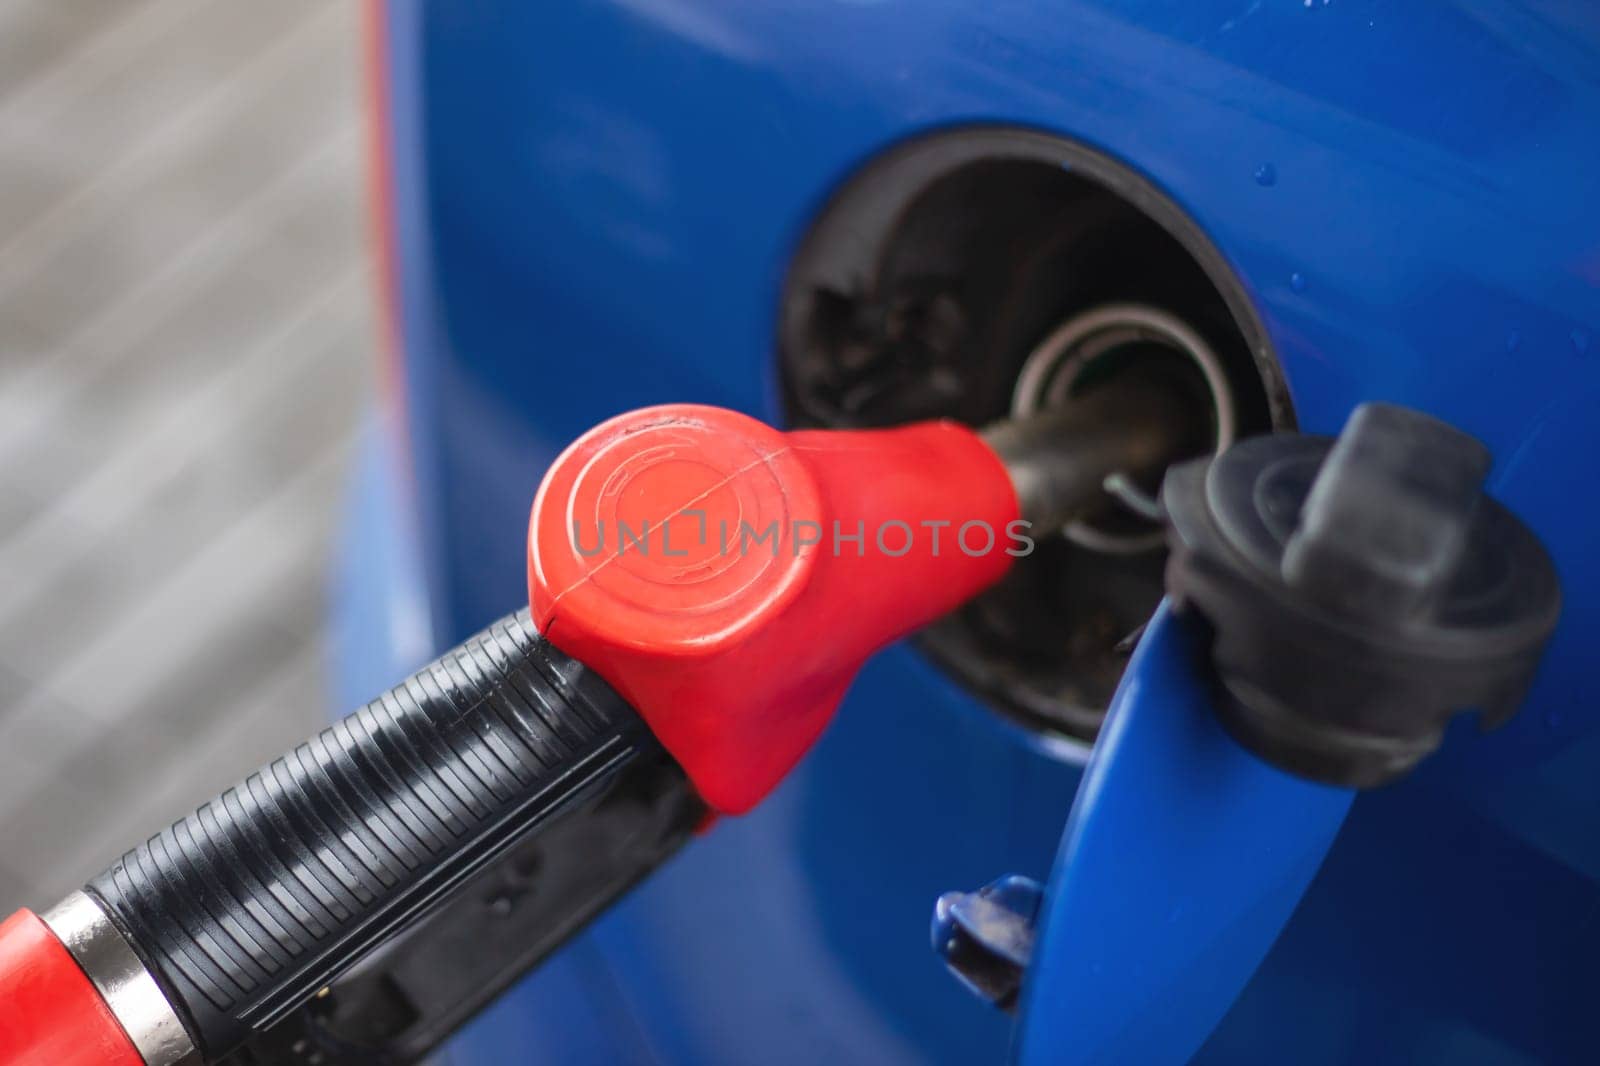 Refueling a car at a gas station close up